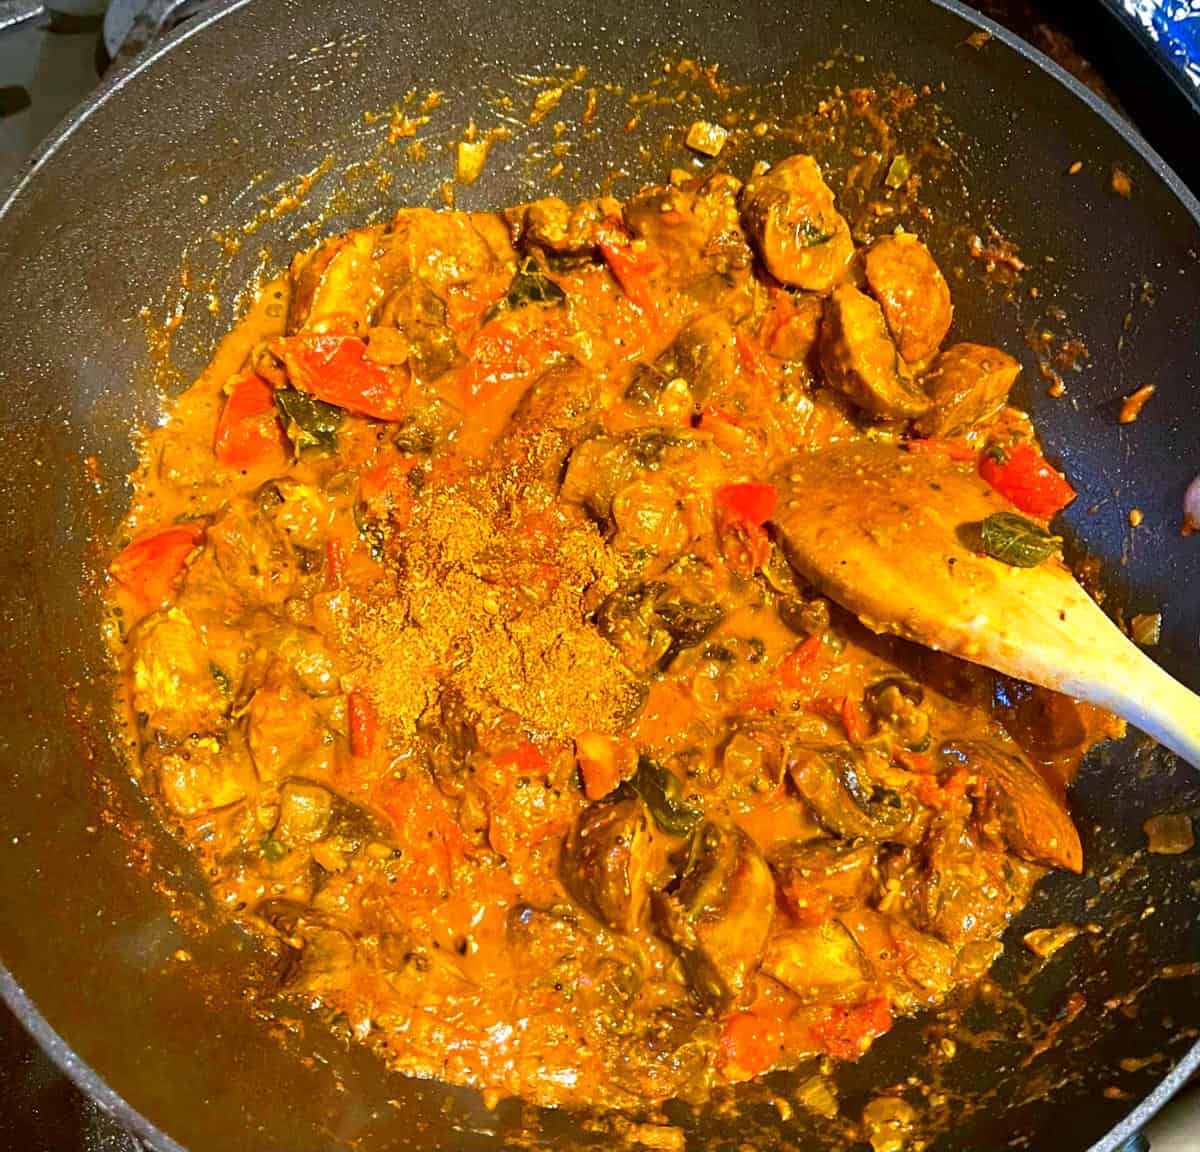 Mushrooms added to curry sauce.